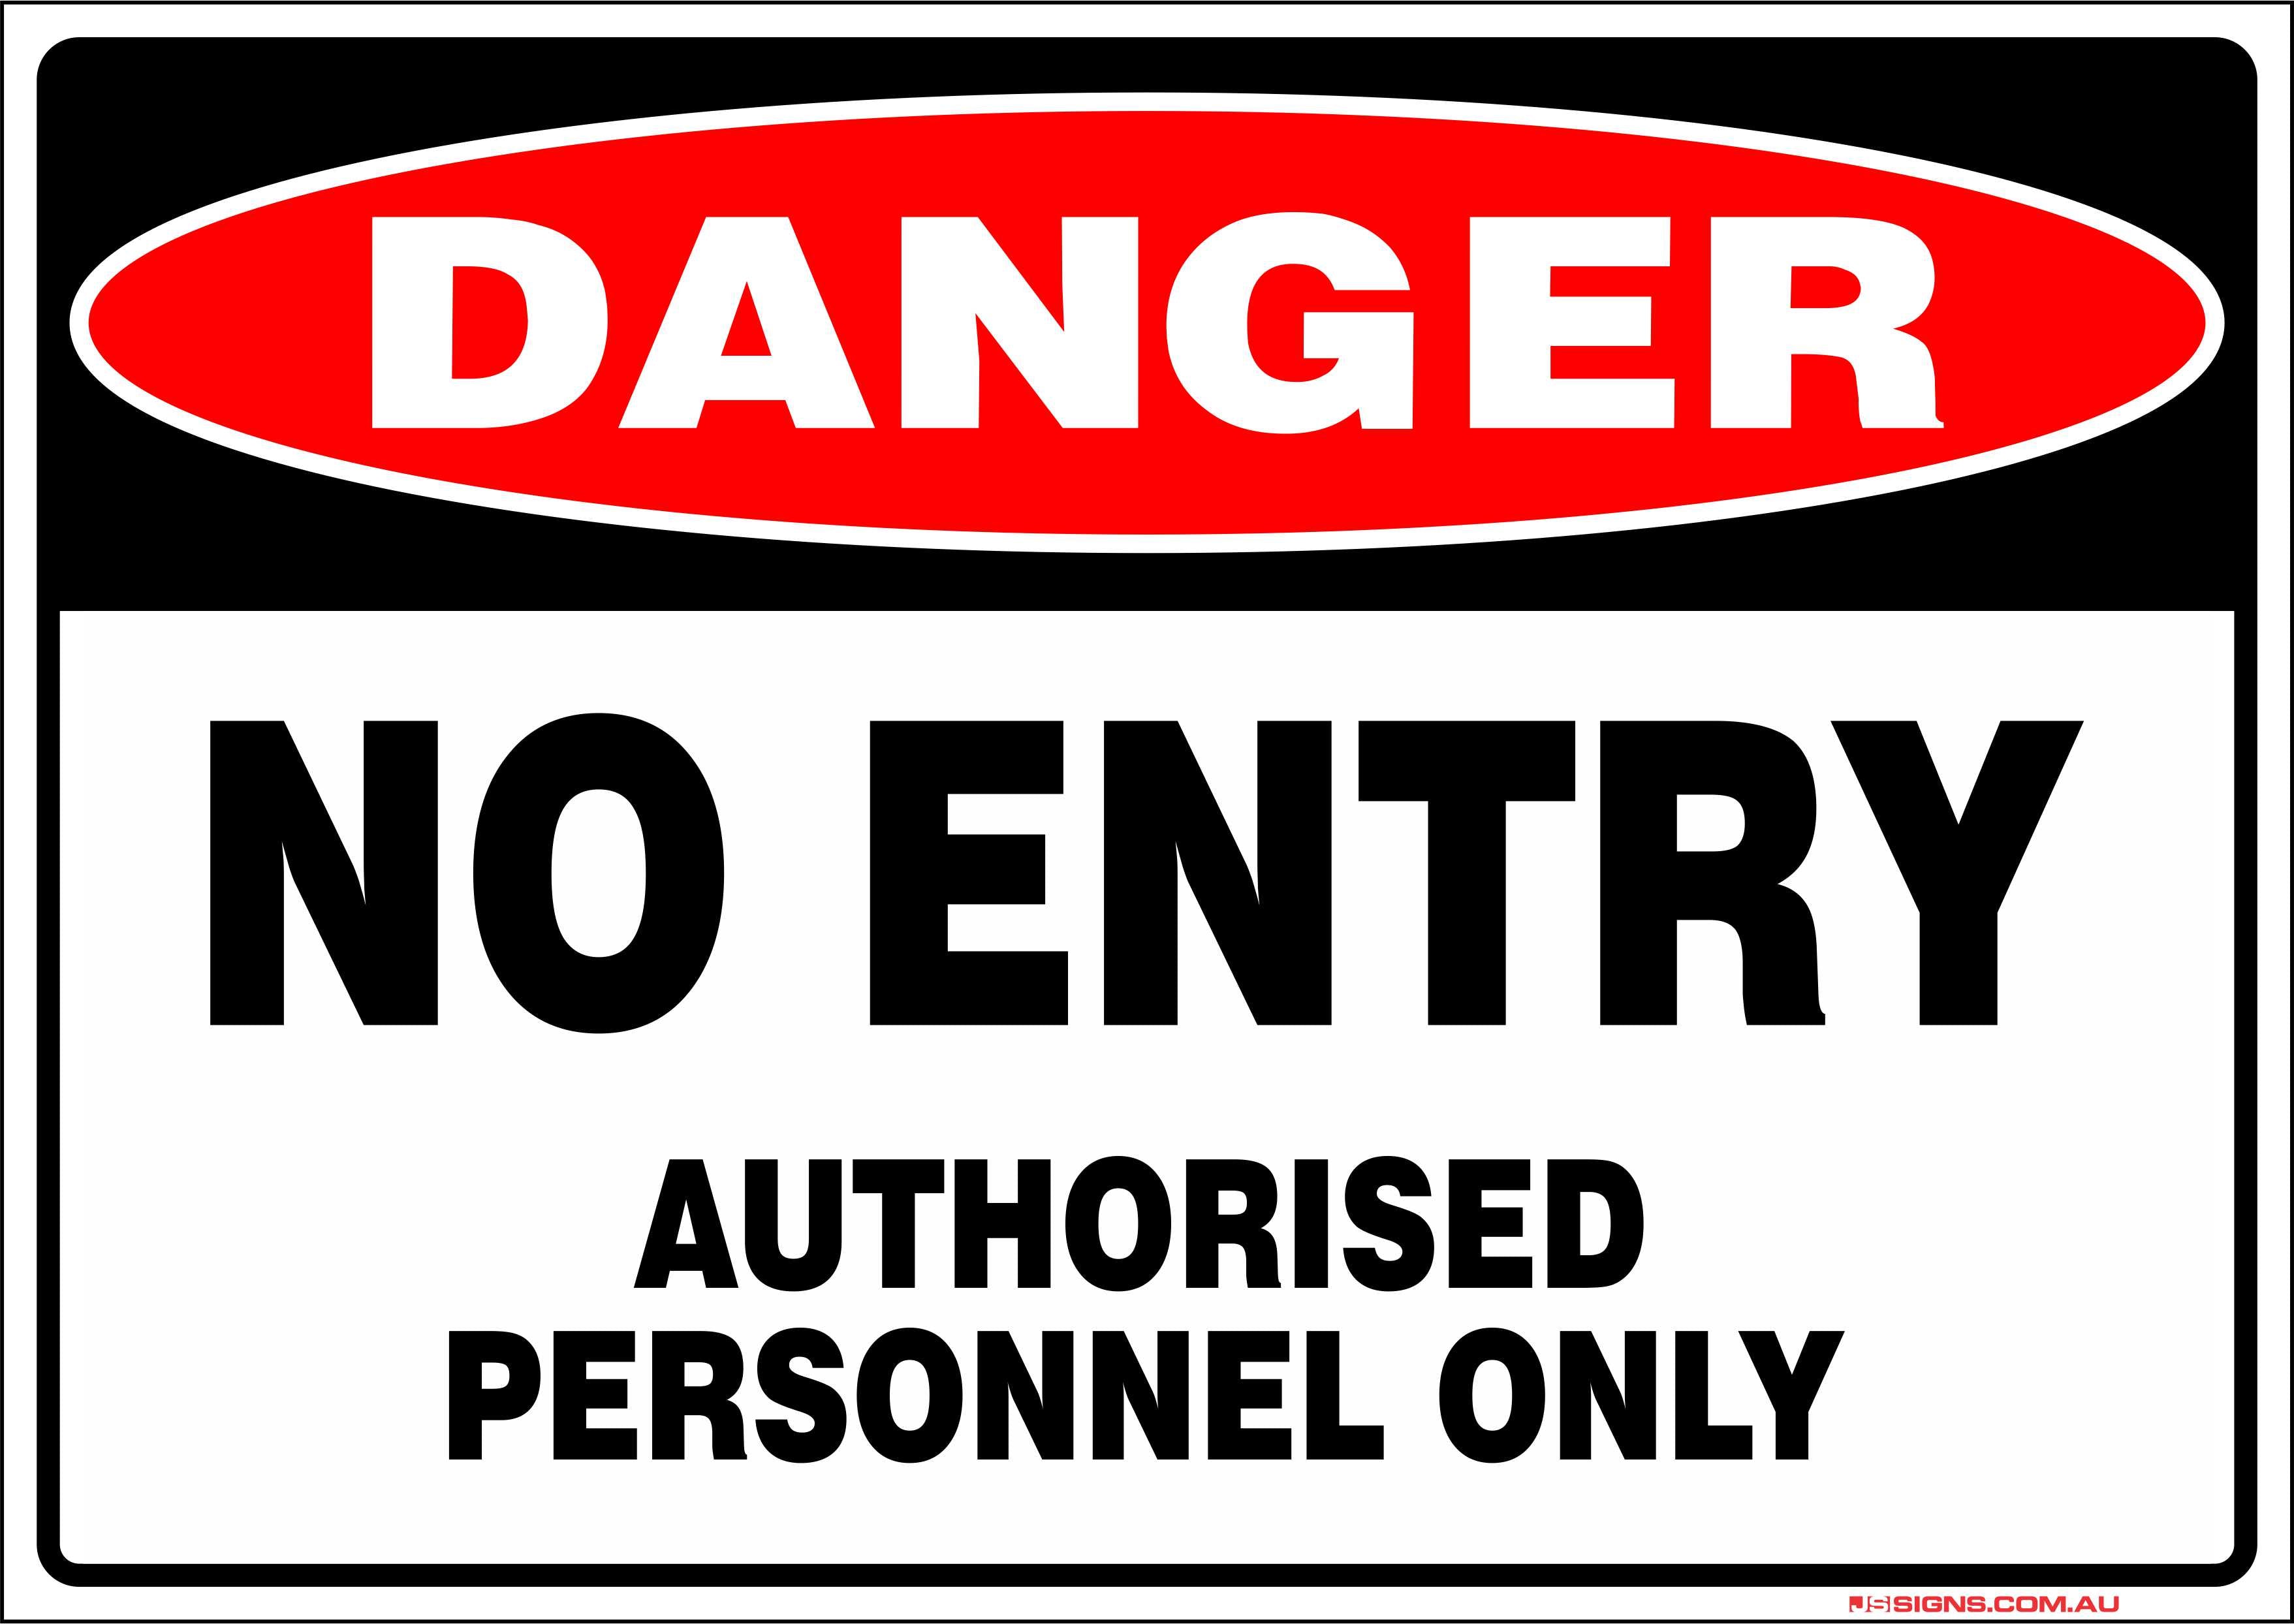 no entry authorized personnel only